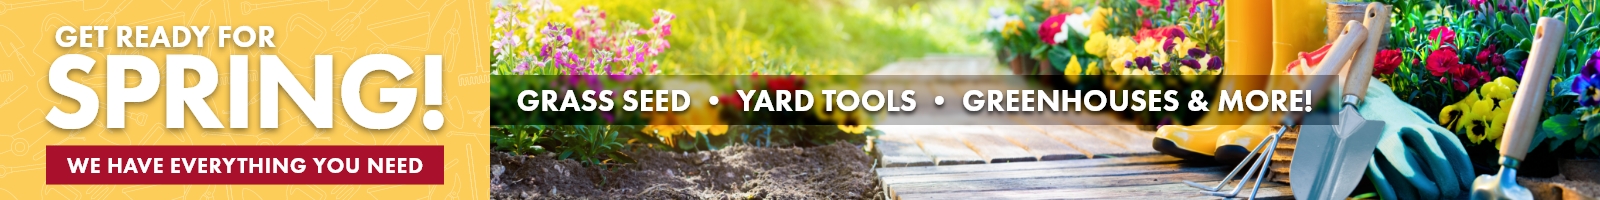 Get Ready for Spring - Shop grass seed, yard tools, greenhouses and more!